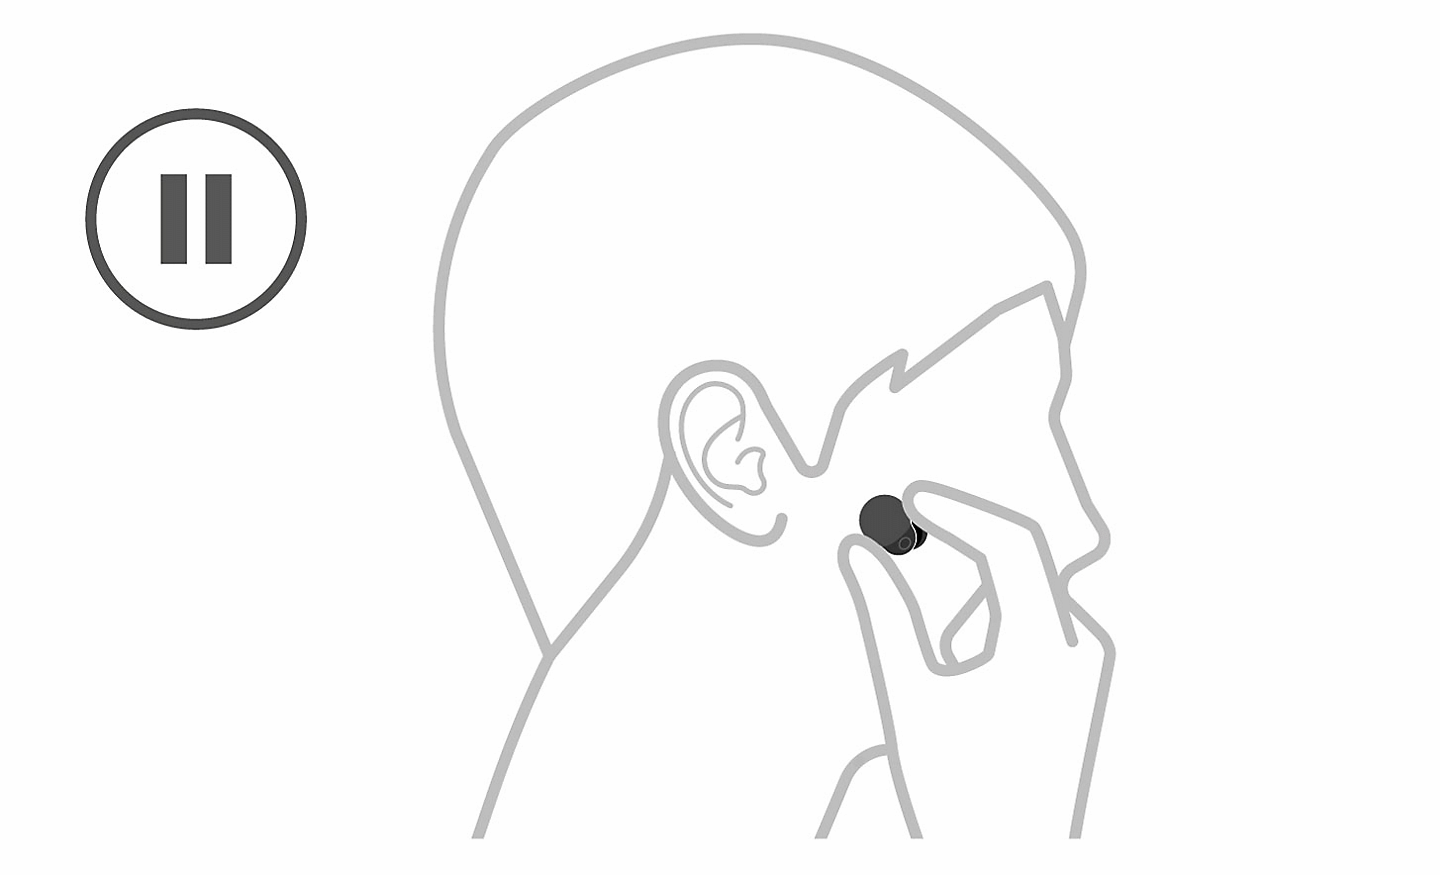 Illustration of a head, on the left there is a pause icon and a hand is removing the headphone from the ear